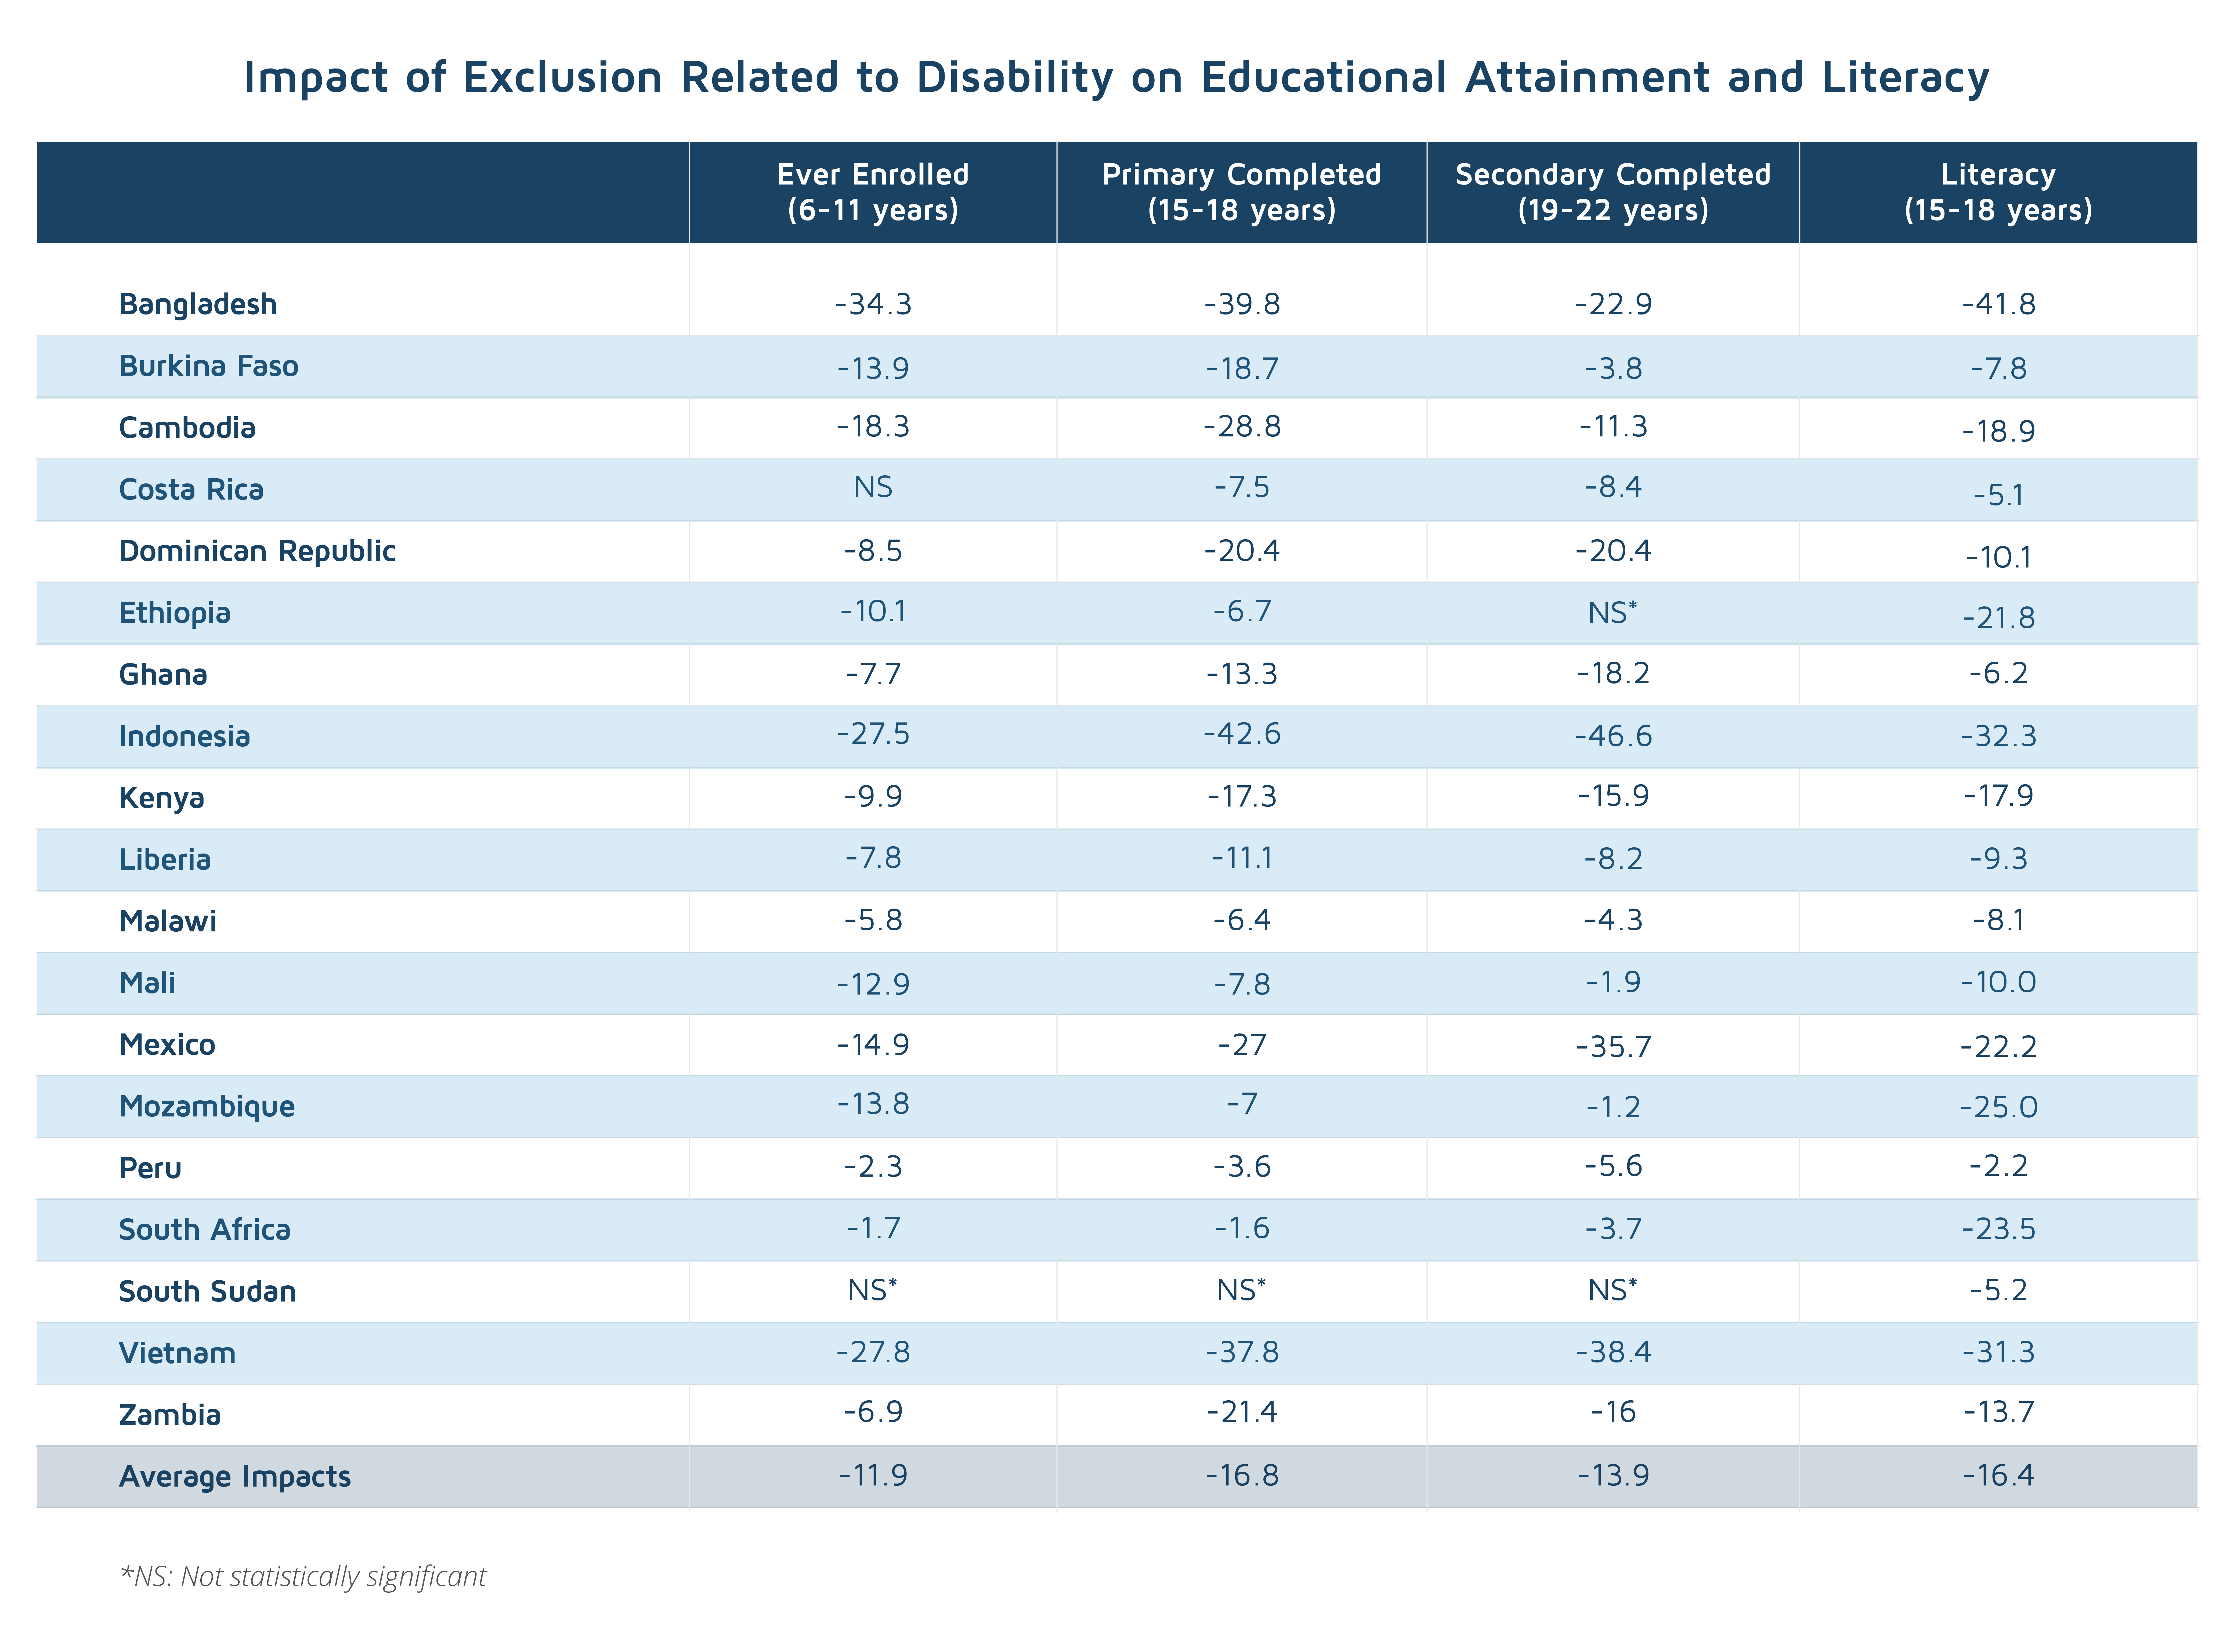 Urgent need for reshaping inclusive education, as millions of disabled children are left behind